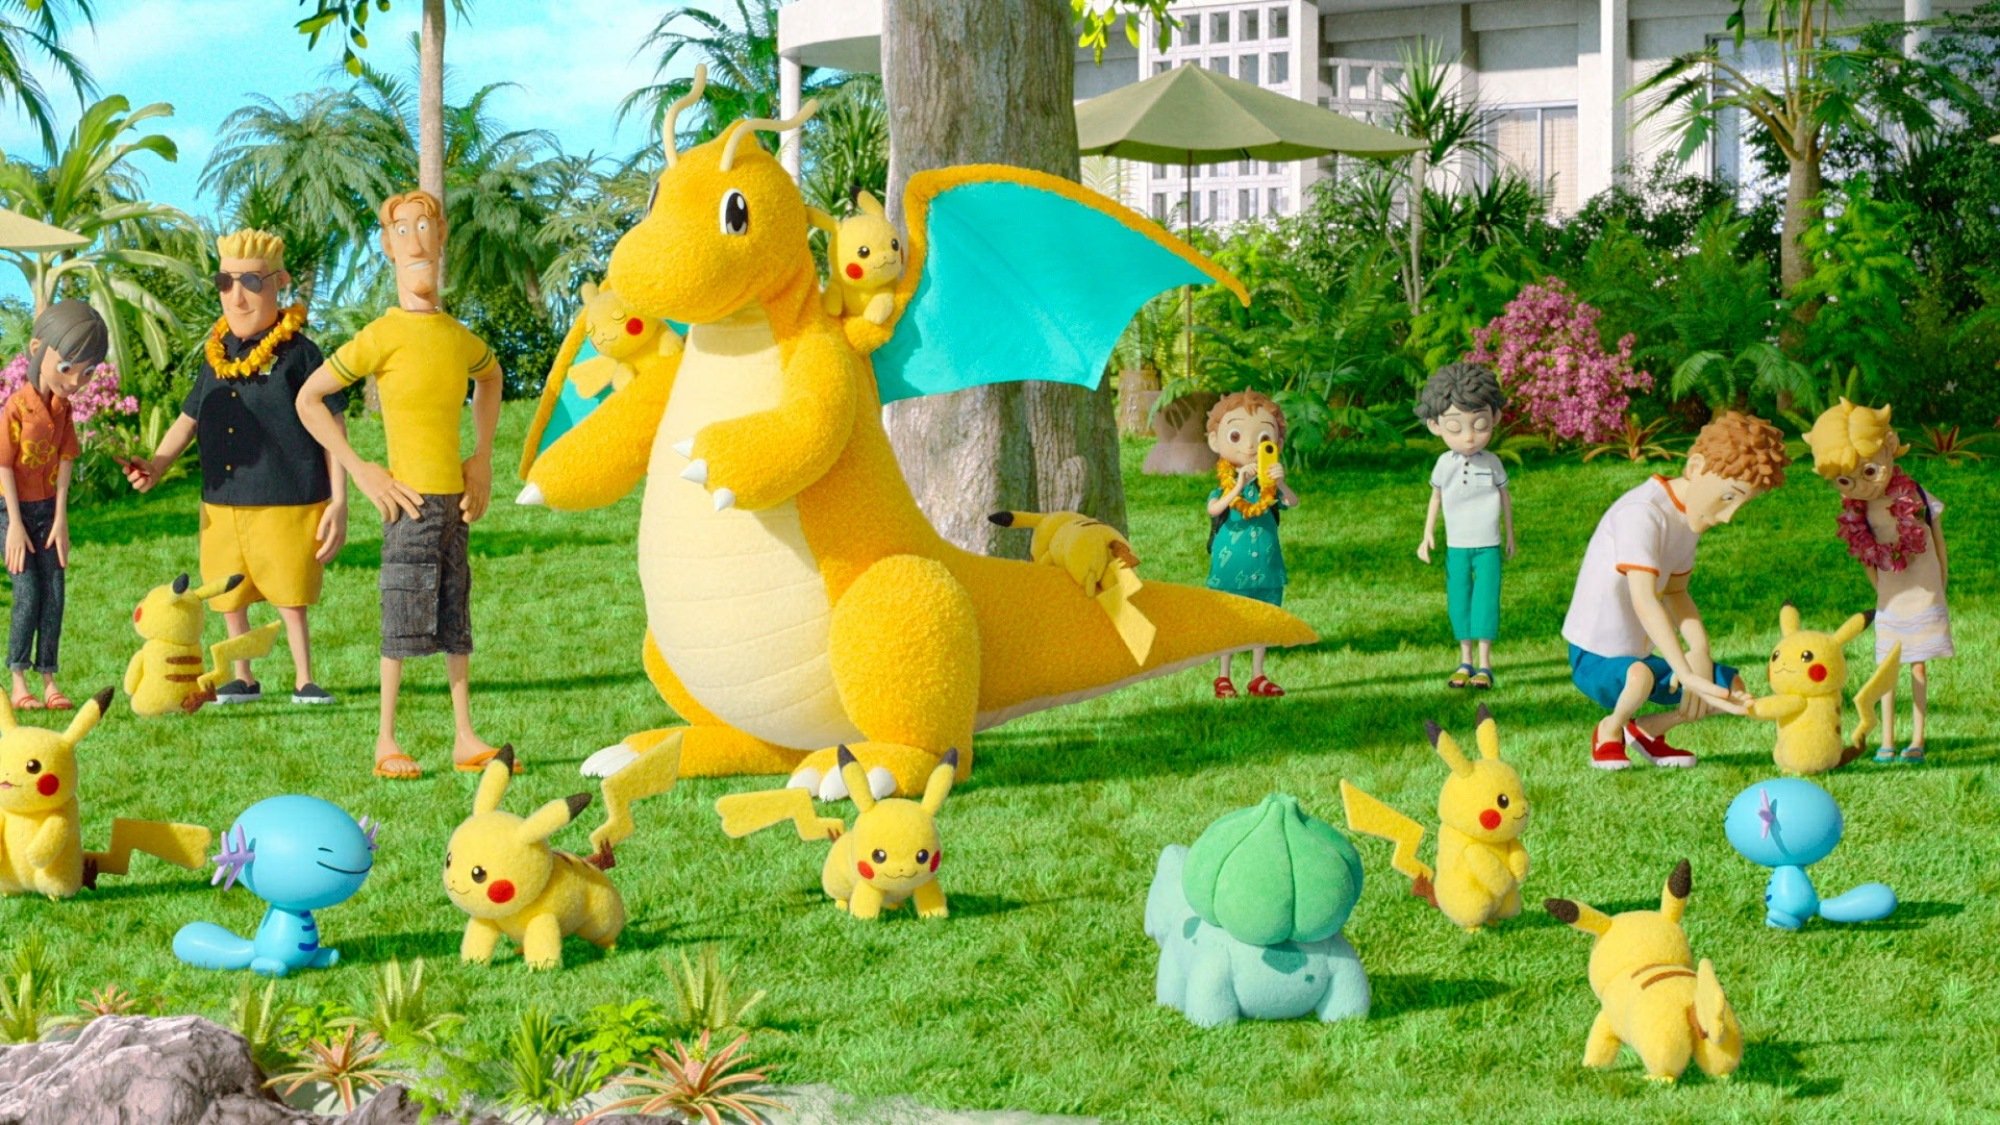 A group of Pokemon, mostly Pikachu, play on a resort lawn.